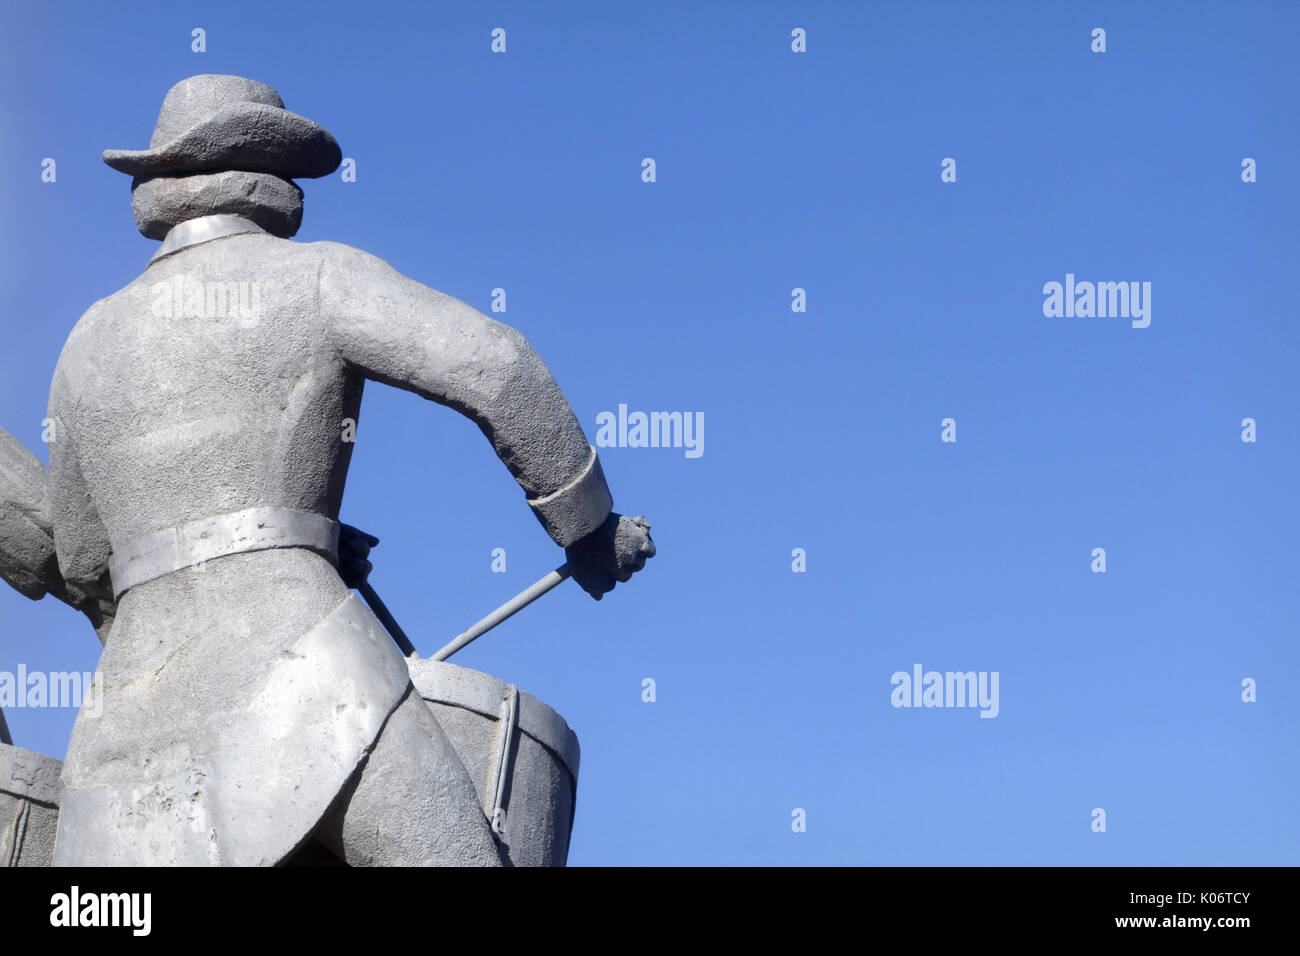 A view of the back of the drummer in the Spirit of 76 sculpture at the Oklahoma State Fair Park. Stock Photo